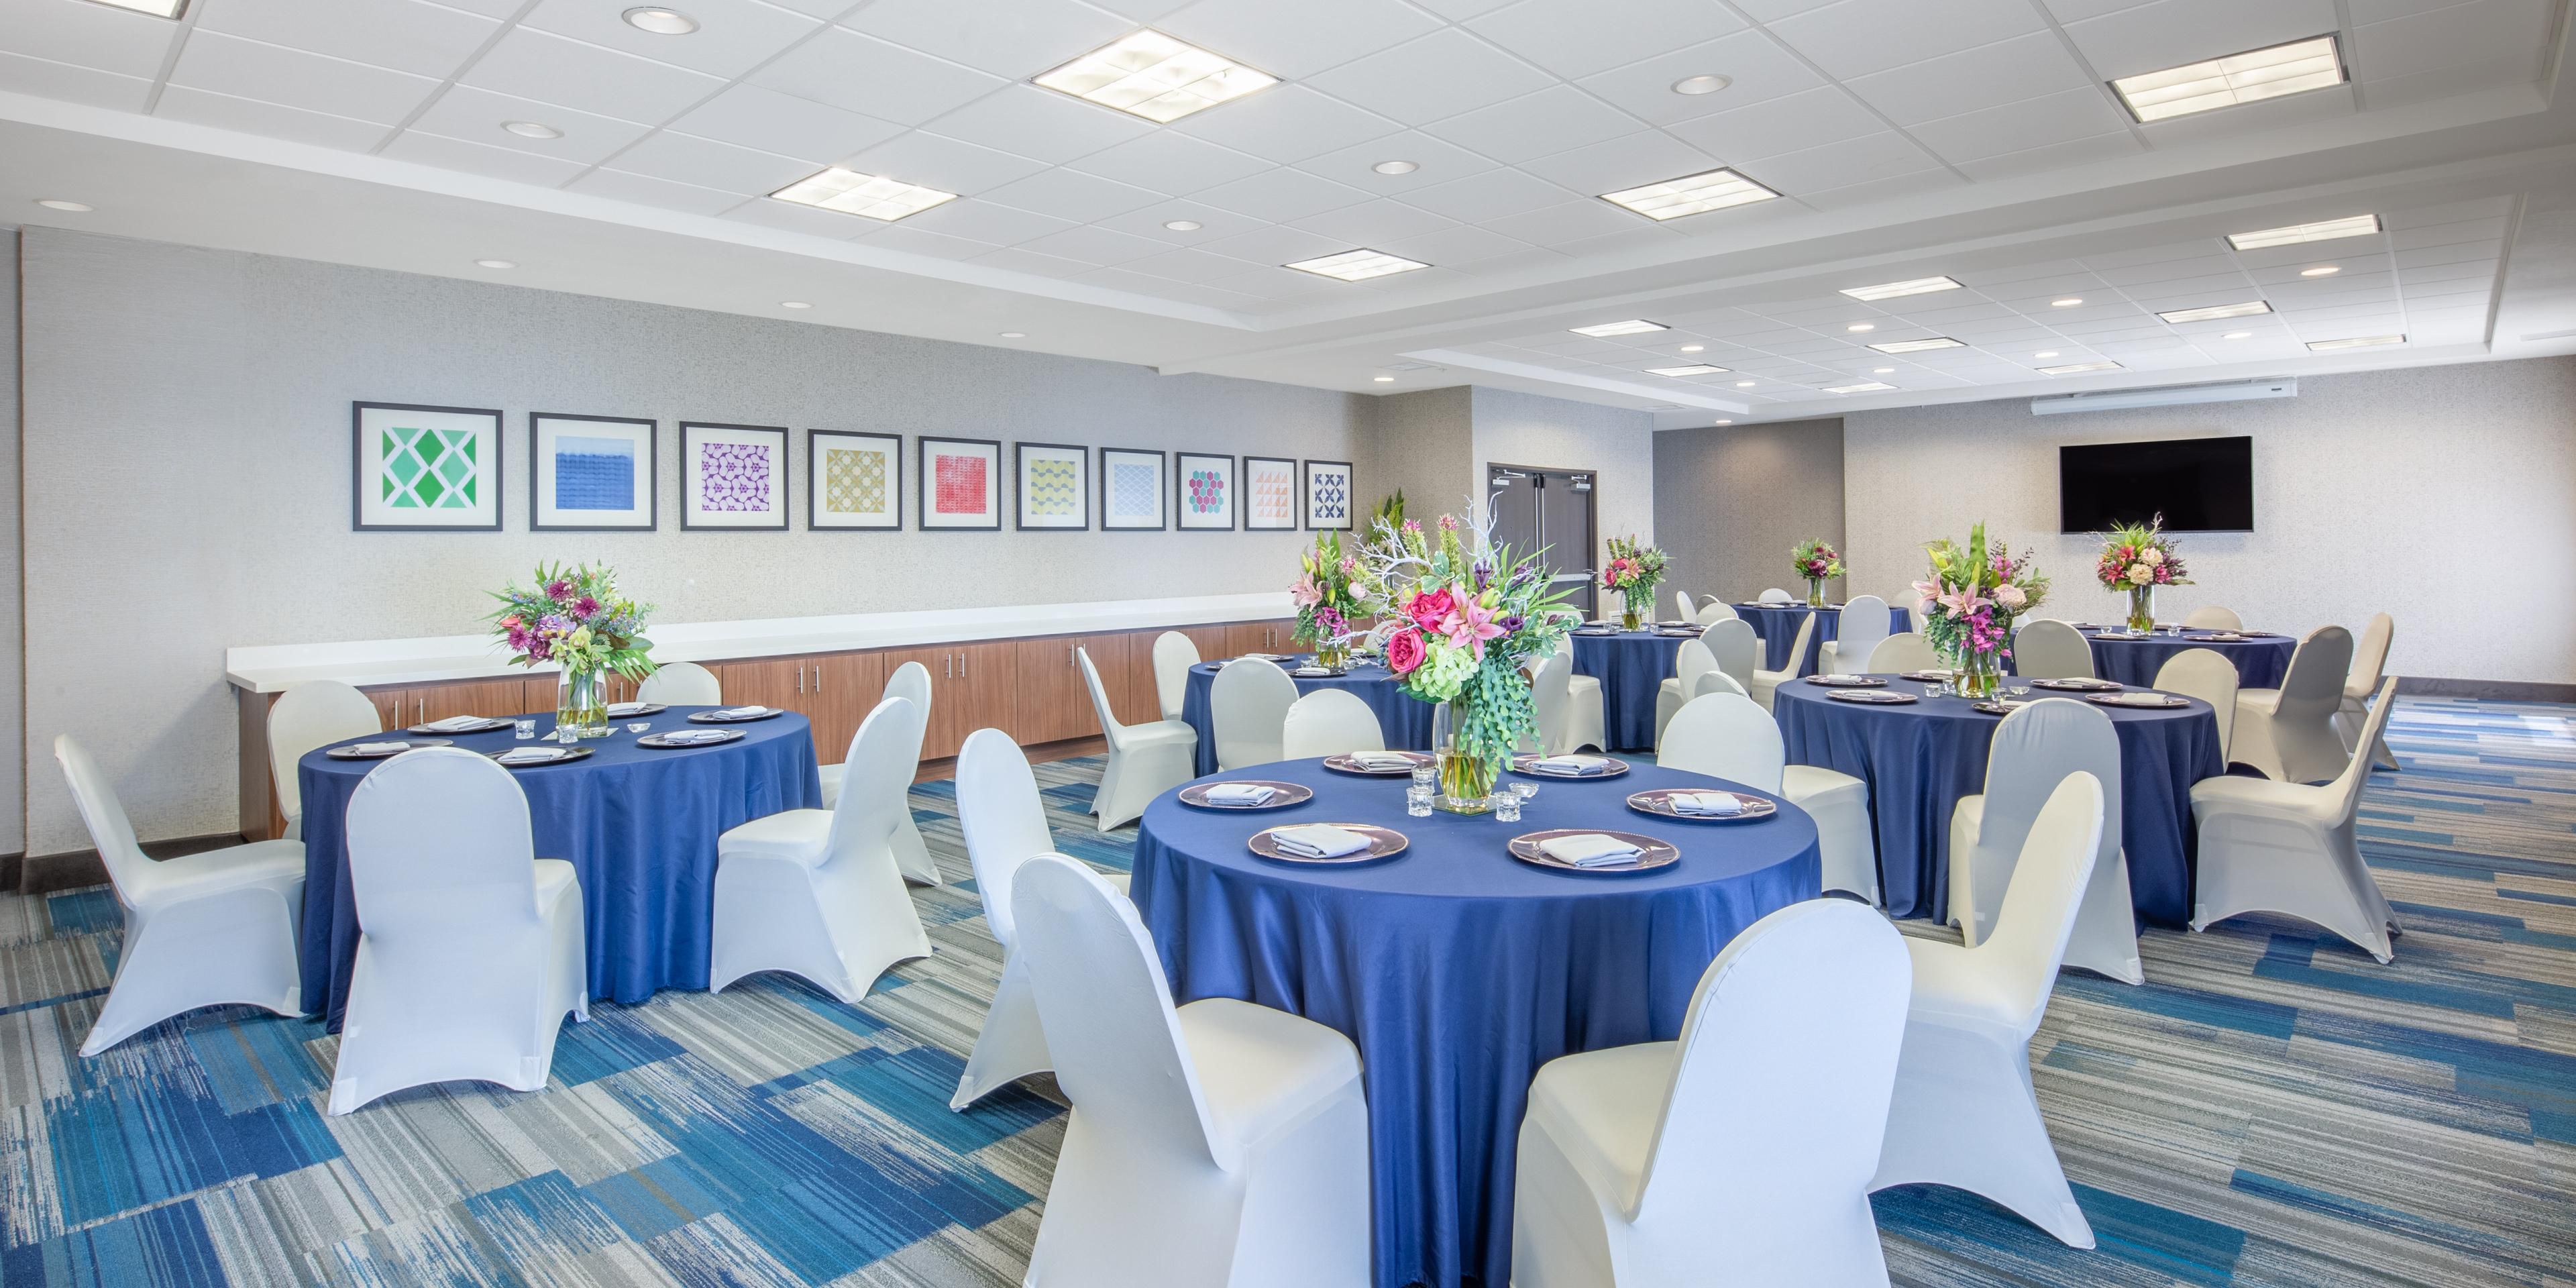 The Holiday Inn Express & Suites offers 1,470 sq ft of meeting space. We have the perfect setup to accommodate anything from business meetings to celebrating your special event. Come plan your next celebration with us!  